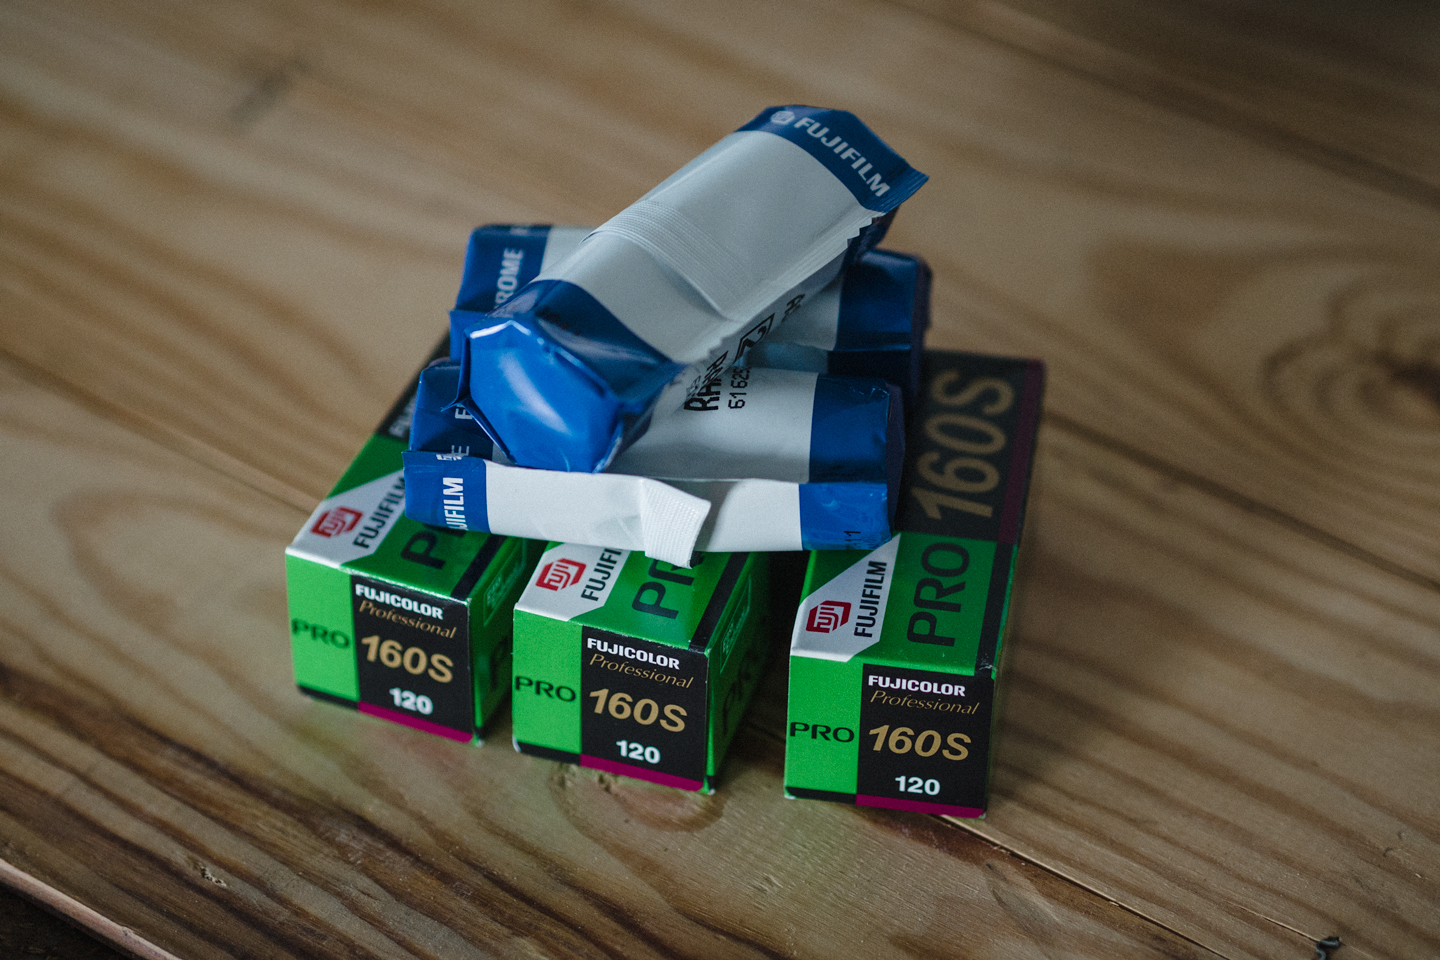 A few Fuji films in 120 and 220 format laying on a wooden box.